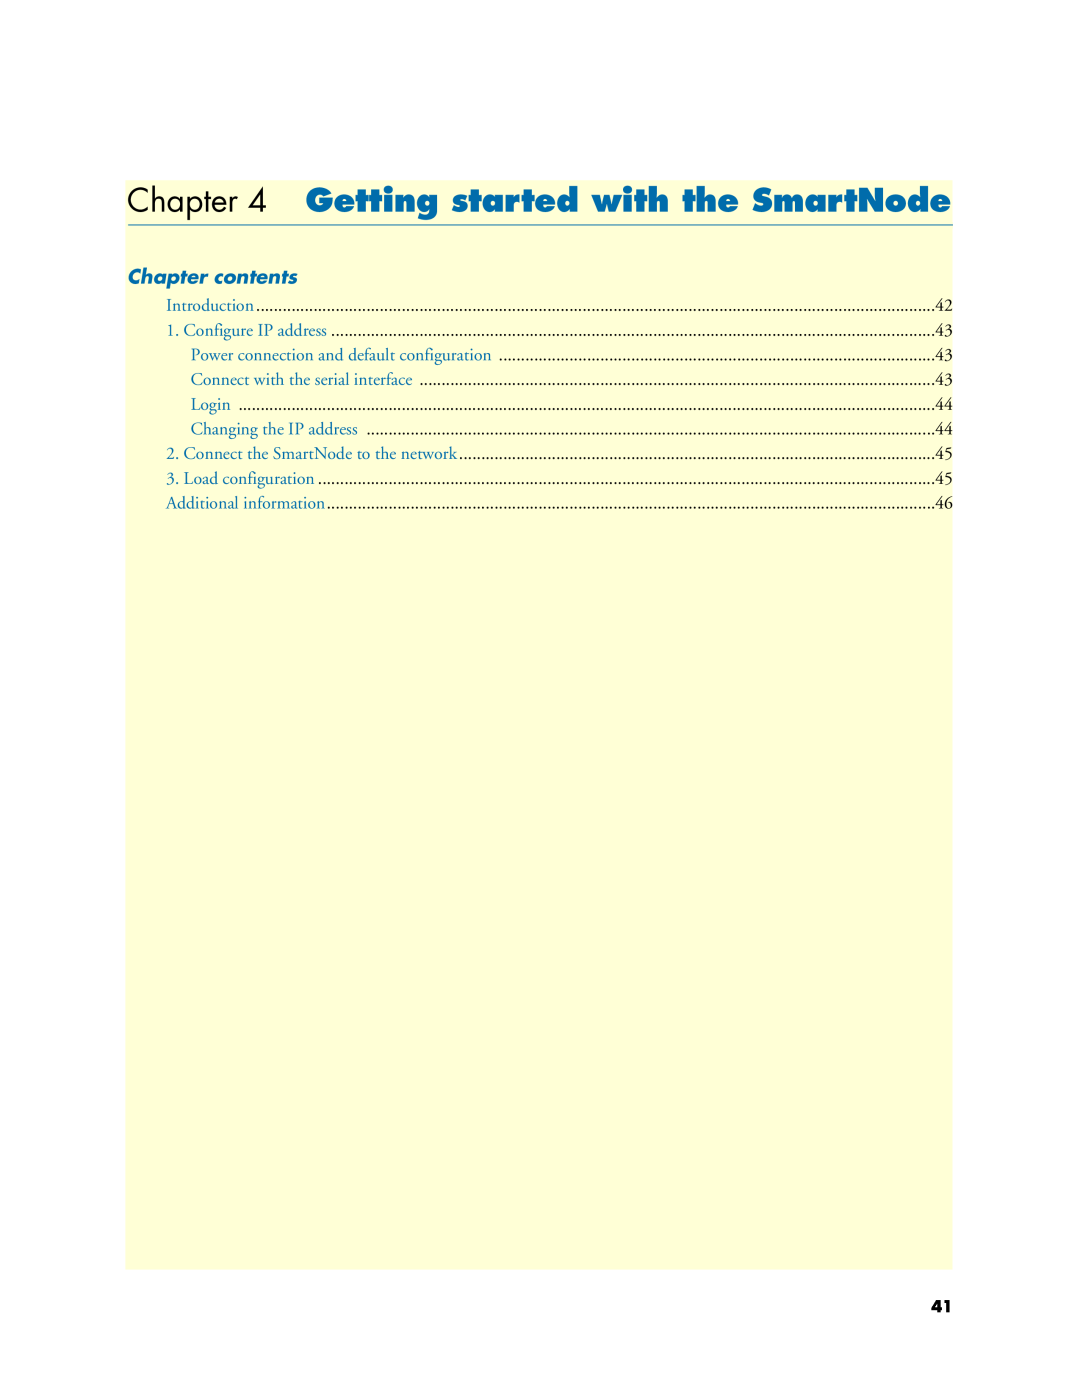 Patton electronic 4110 manual Getting started with the SmartNode, Chapter contents 